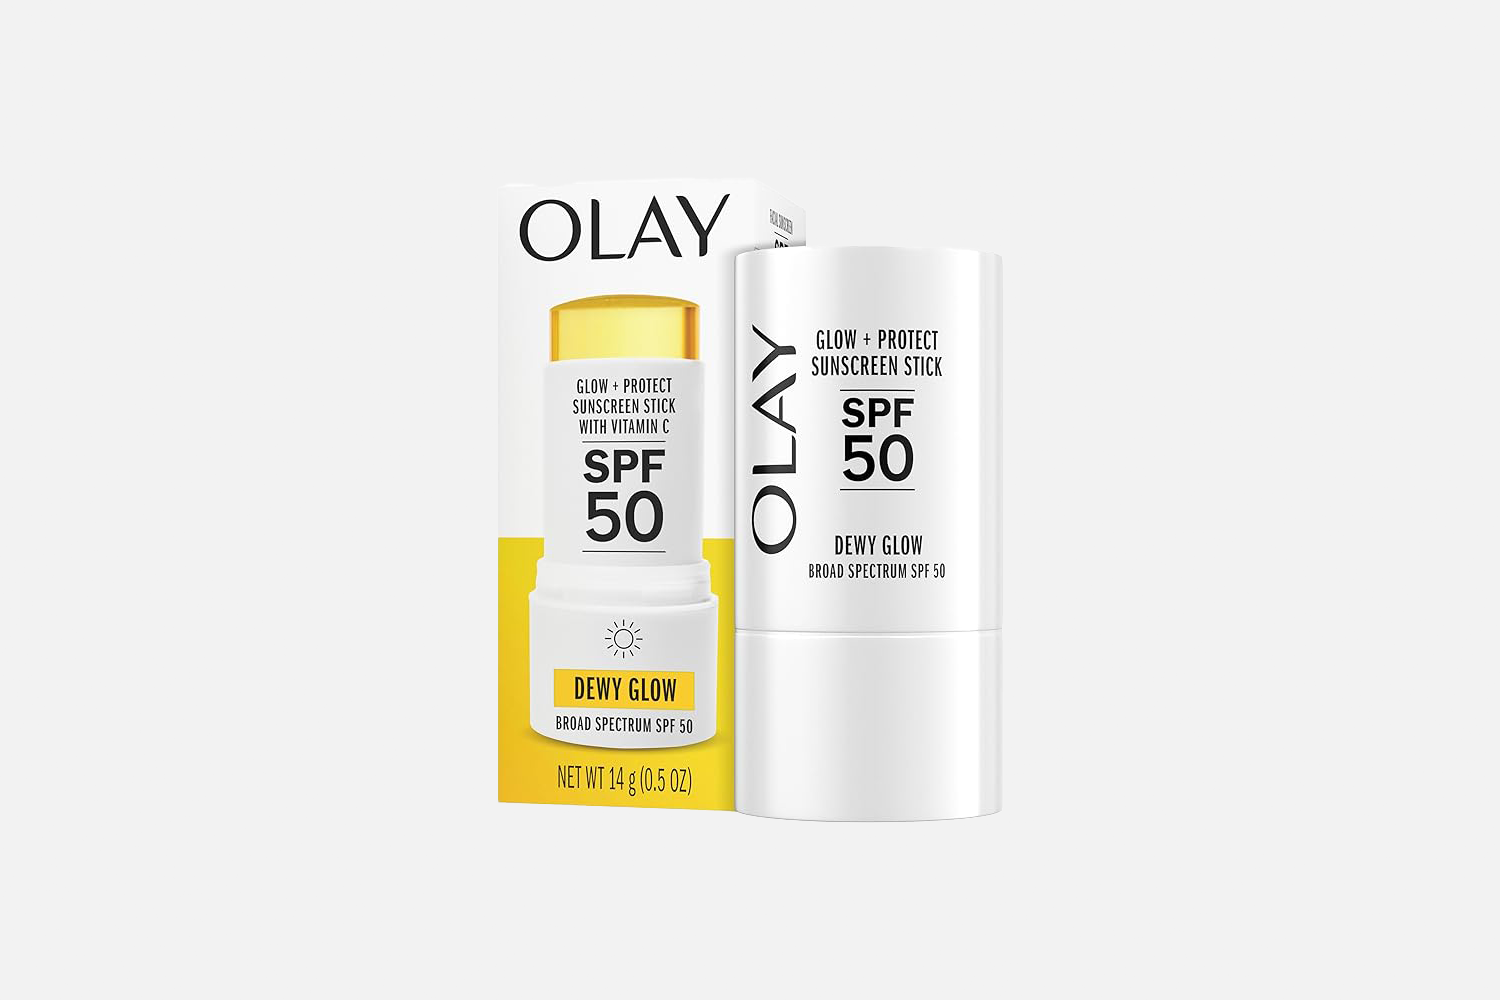 Olay Glow & Protect SPF 50 Sunscreen Stick Broad Spectrum with Vitamin C